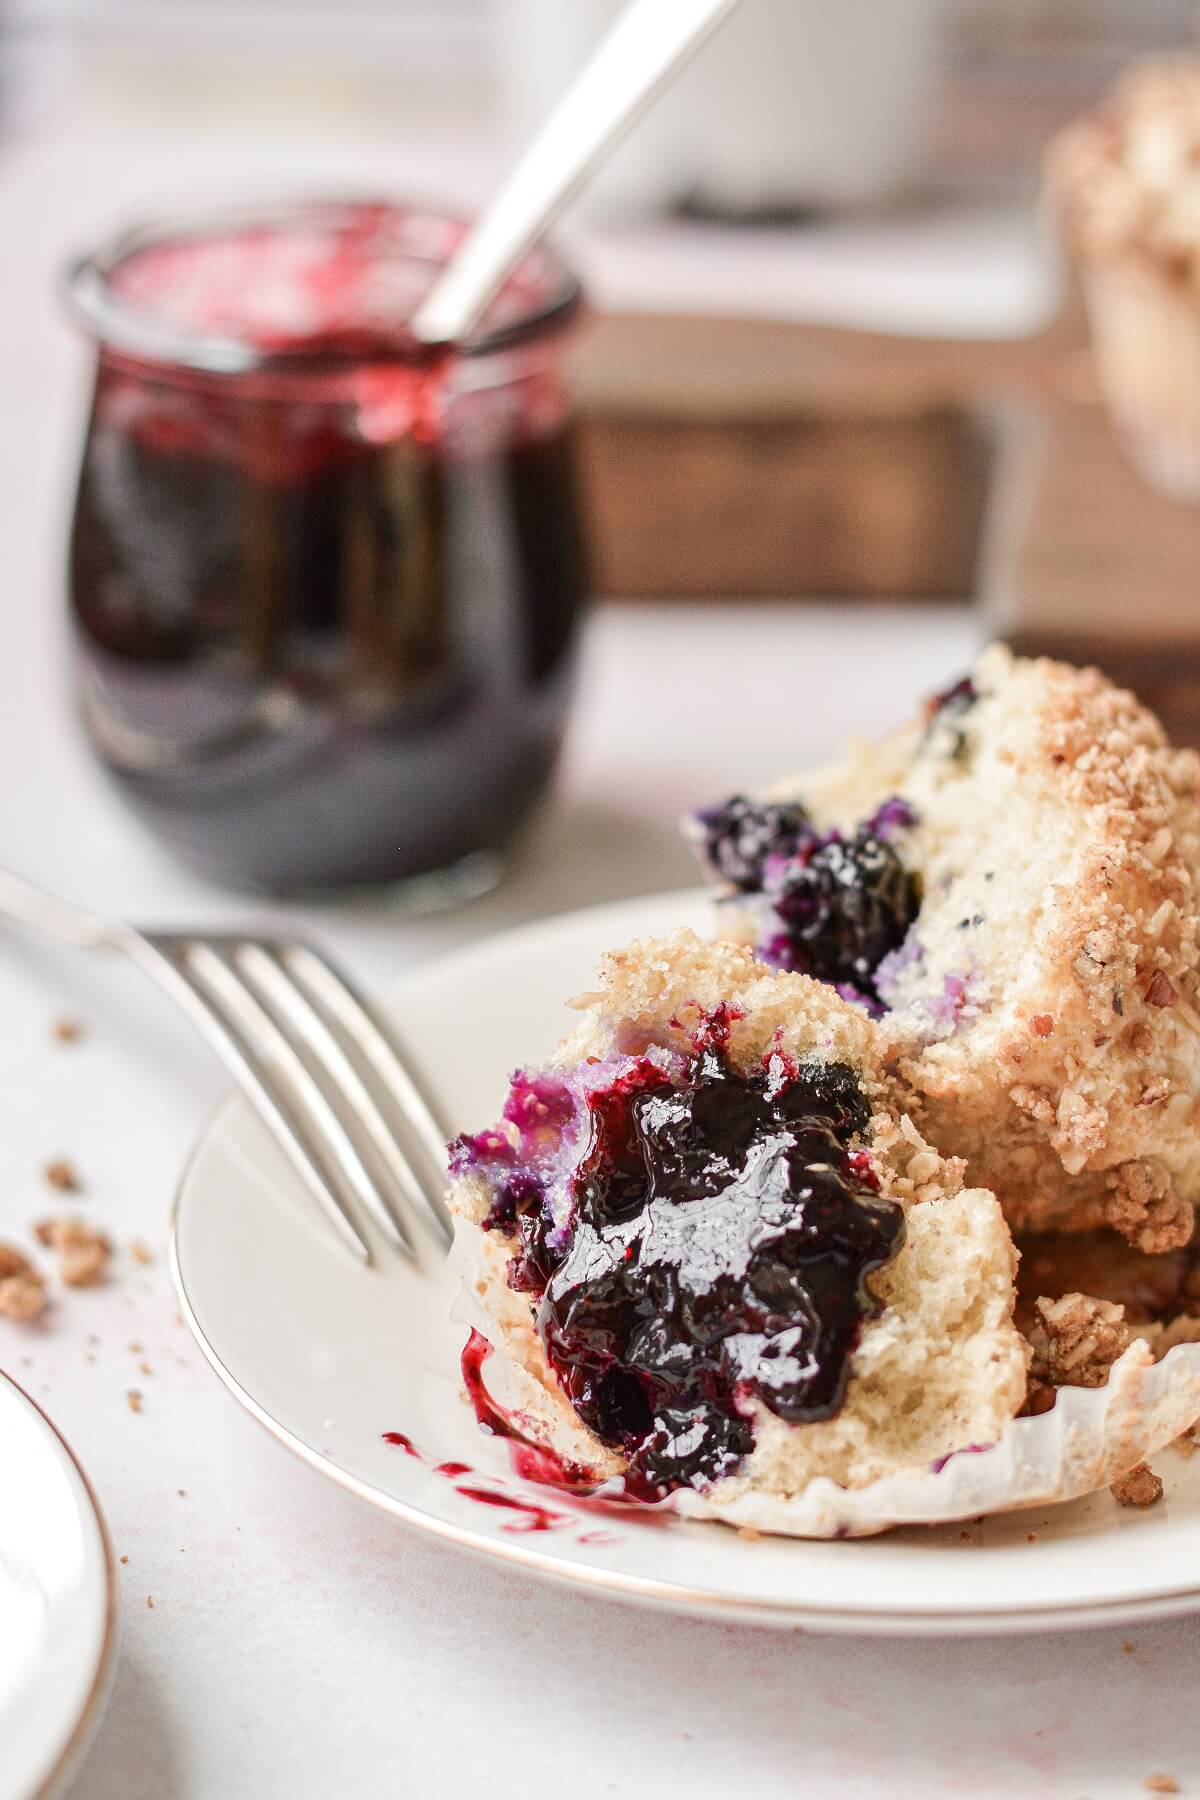 Blueberry muffins, spread with blueberry jam.